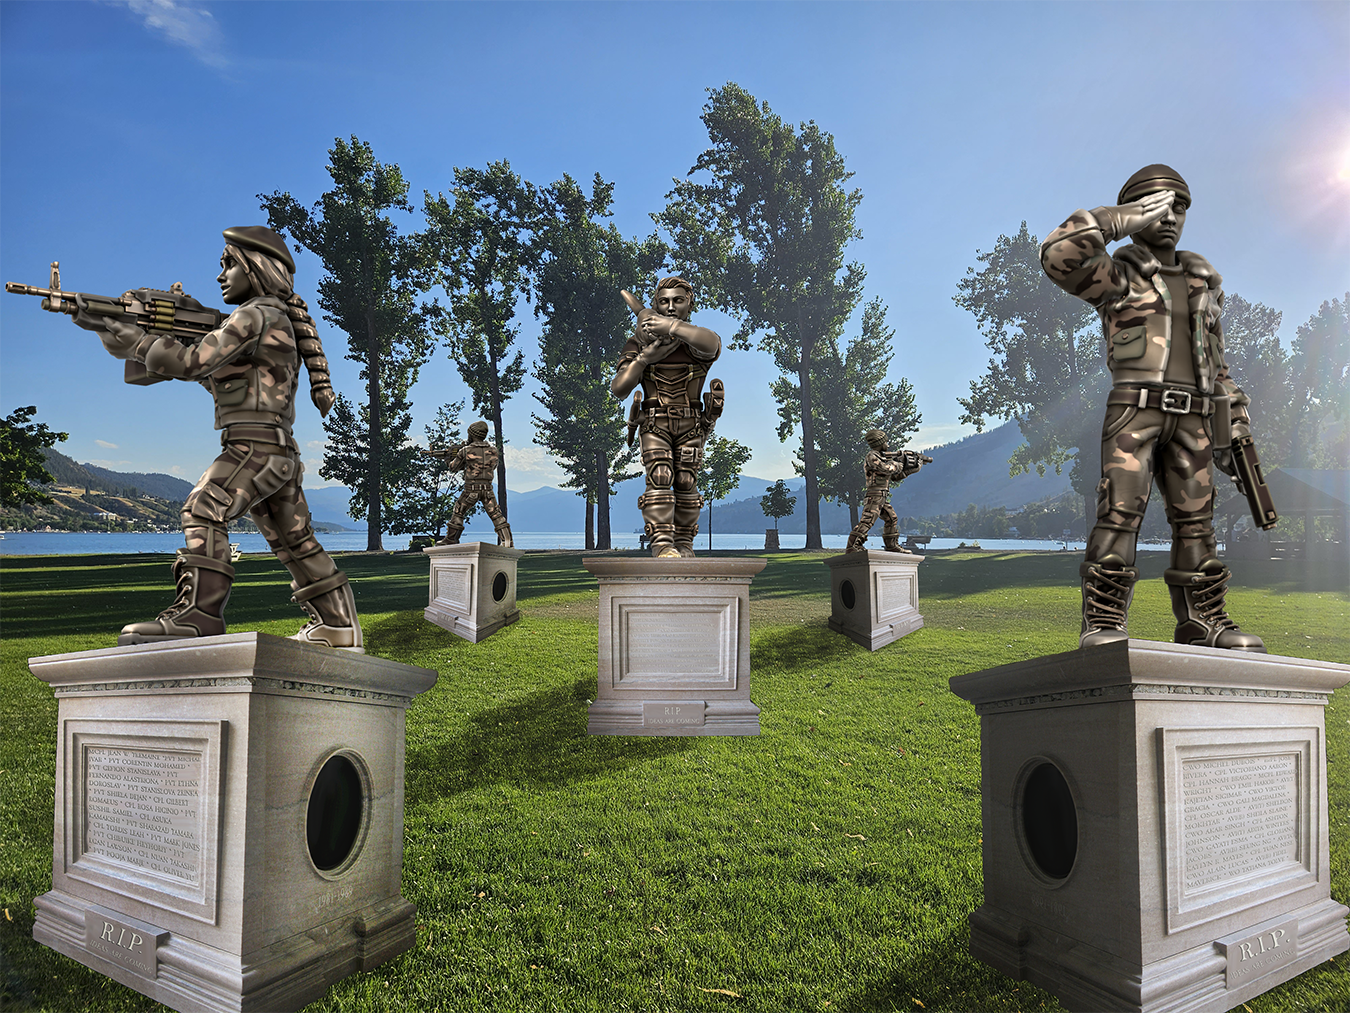 Five bronze statues on stone plinths in a park by a lake on a sunny summer day; the corner statues of soldiers, the center statue of a man with many swords carrying a rabbit gently on his shoulder